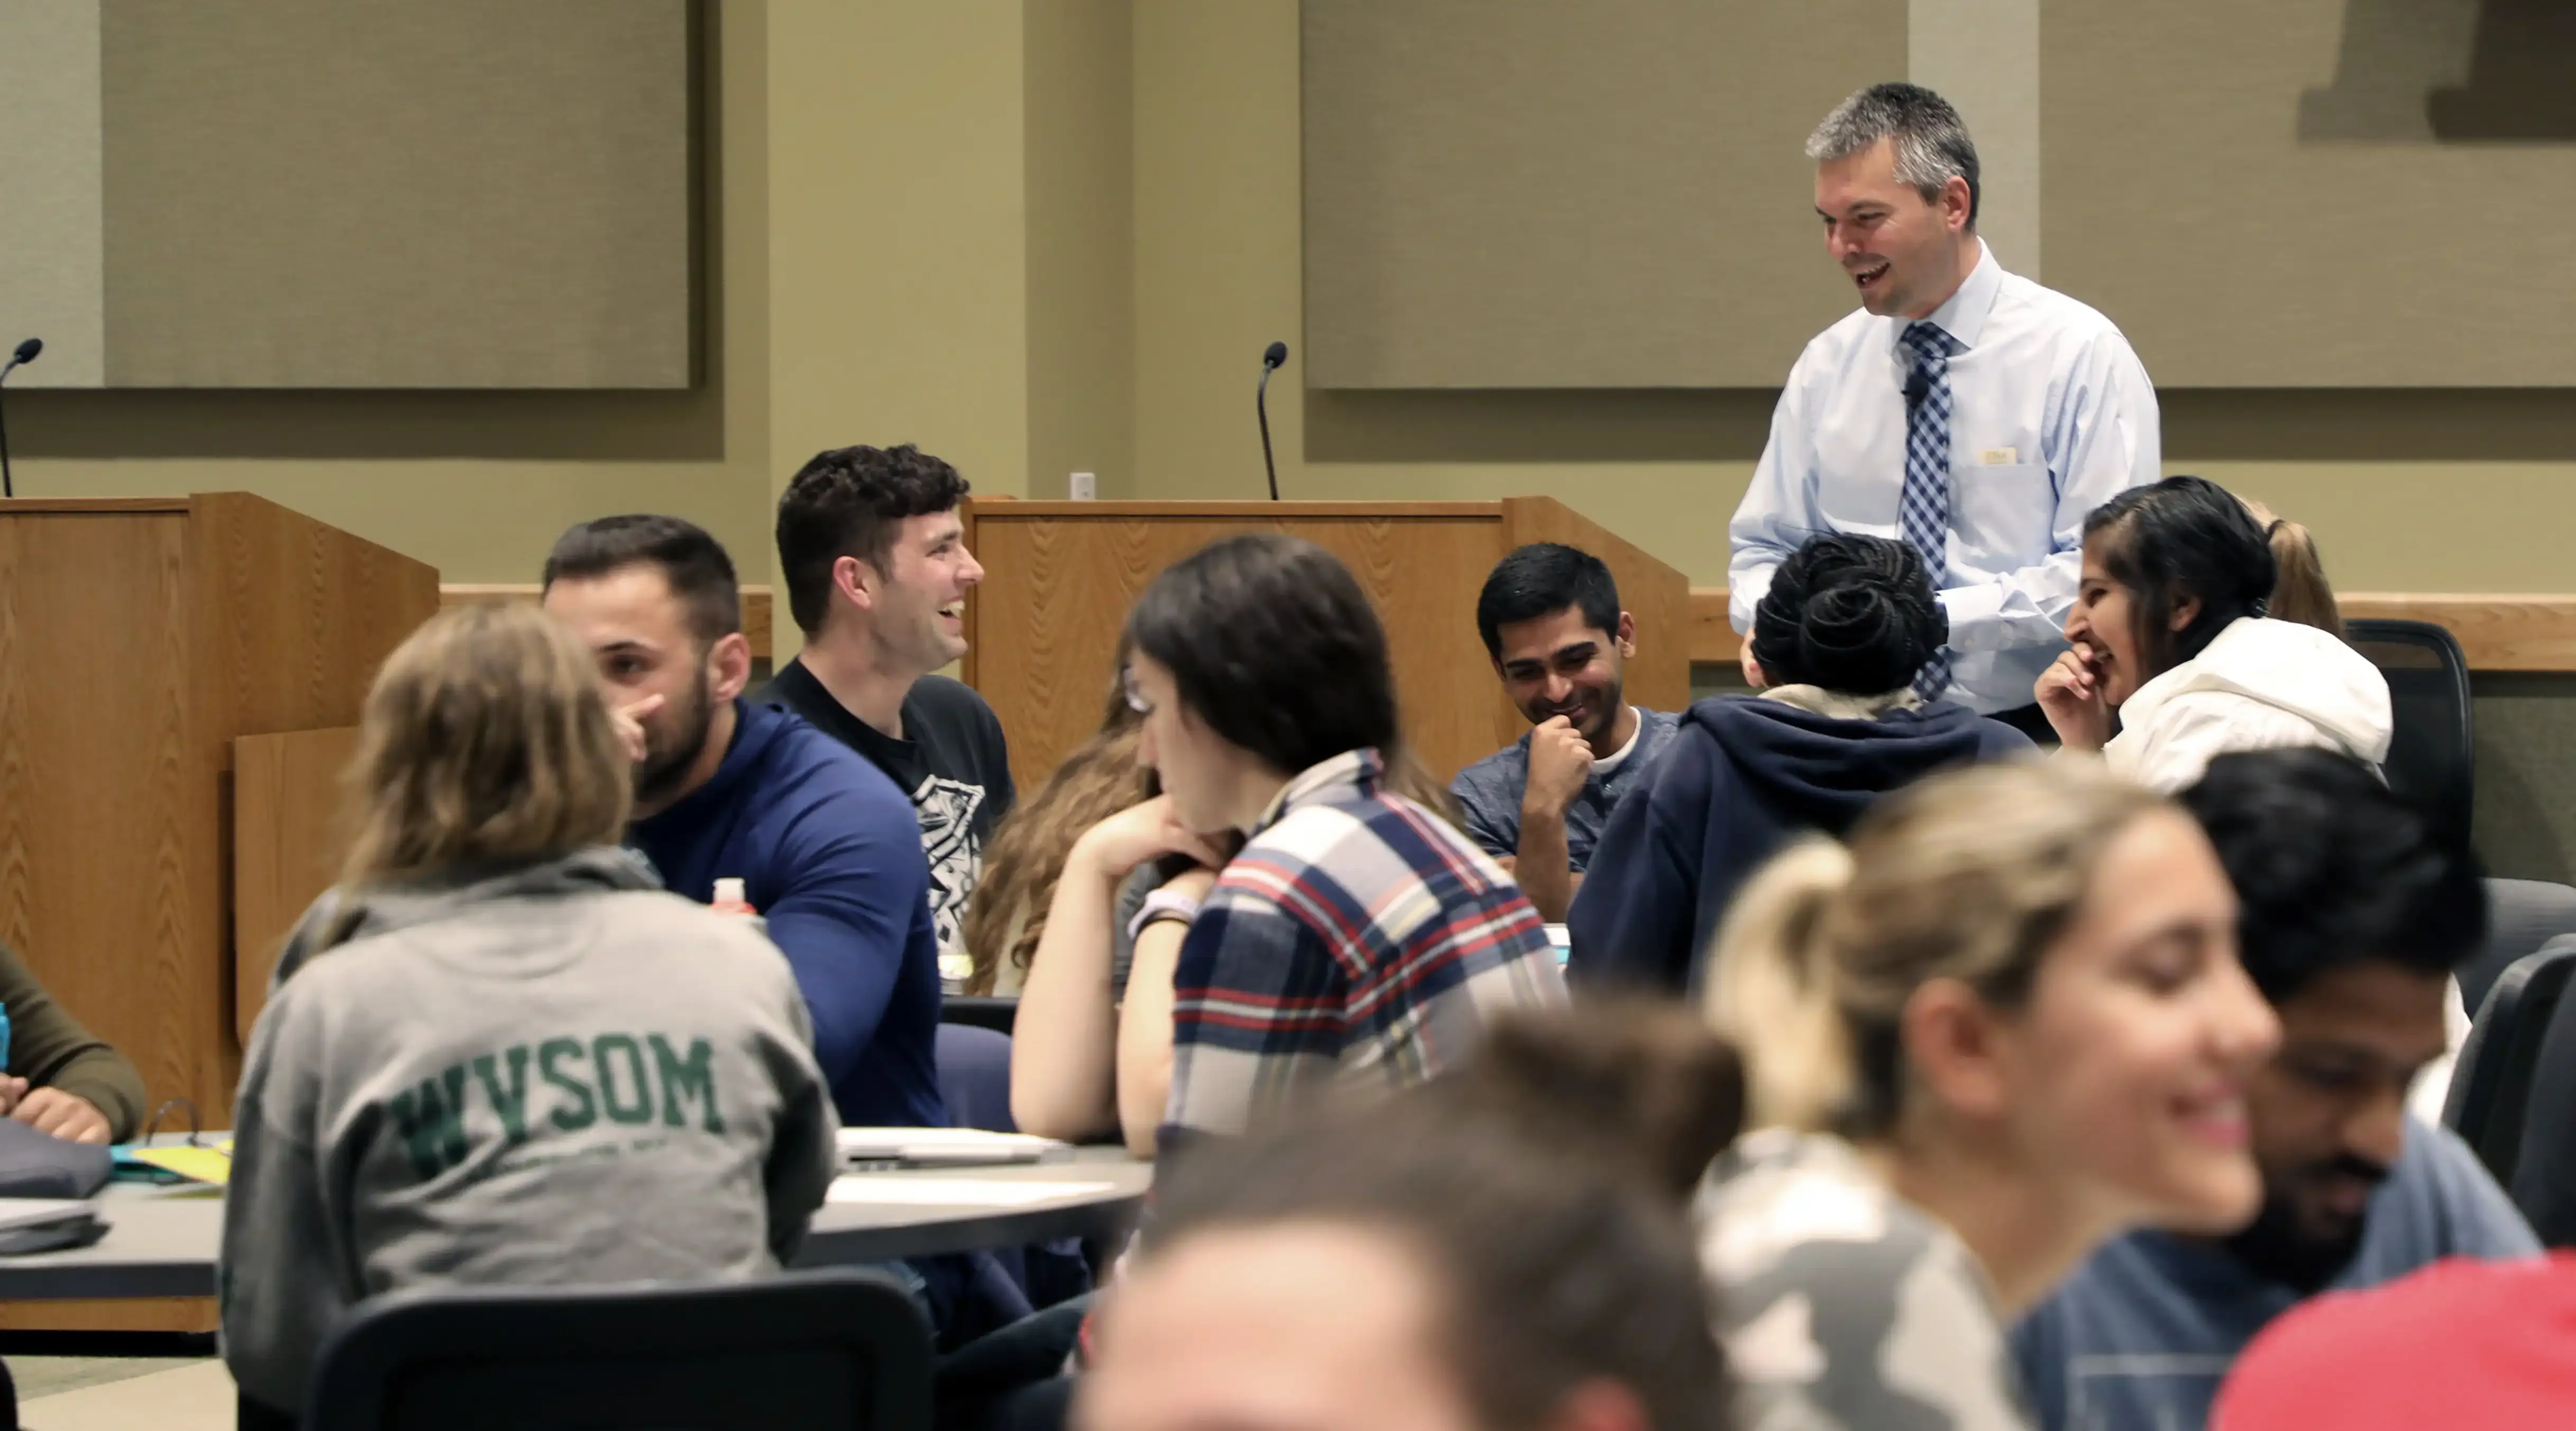 Professor speaking to classroom of students sitting at round tables, student seen smiling and laughing